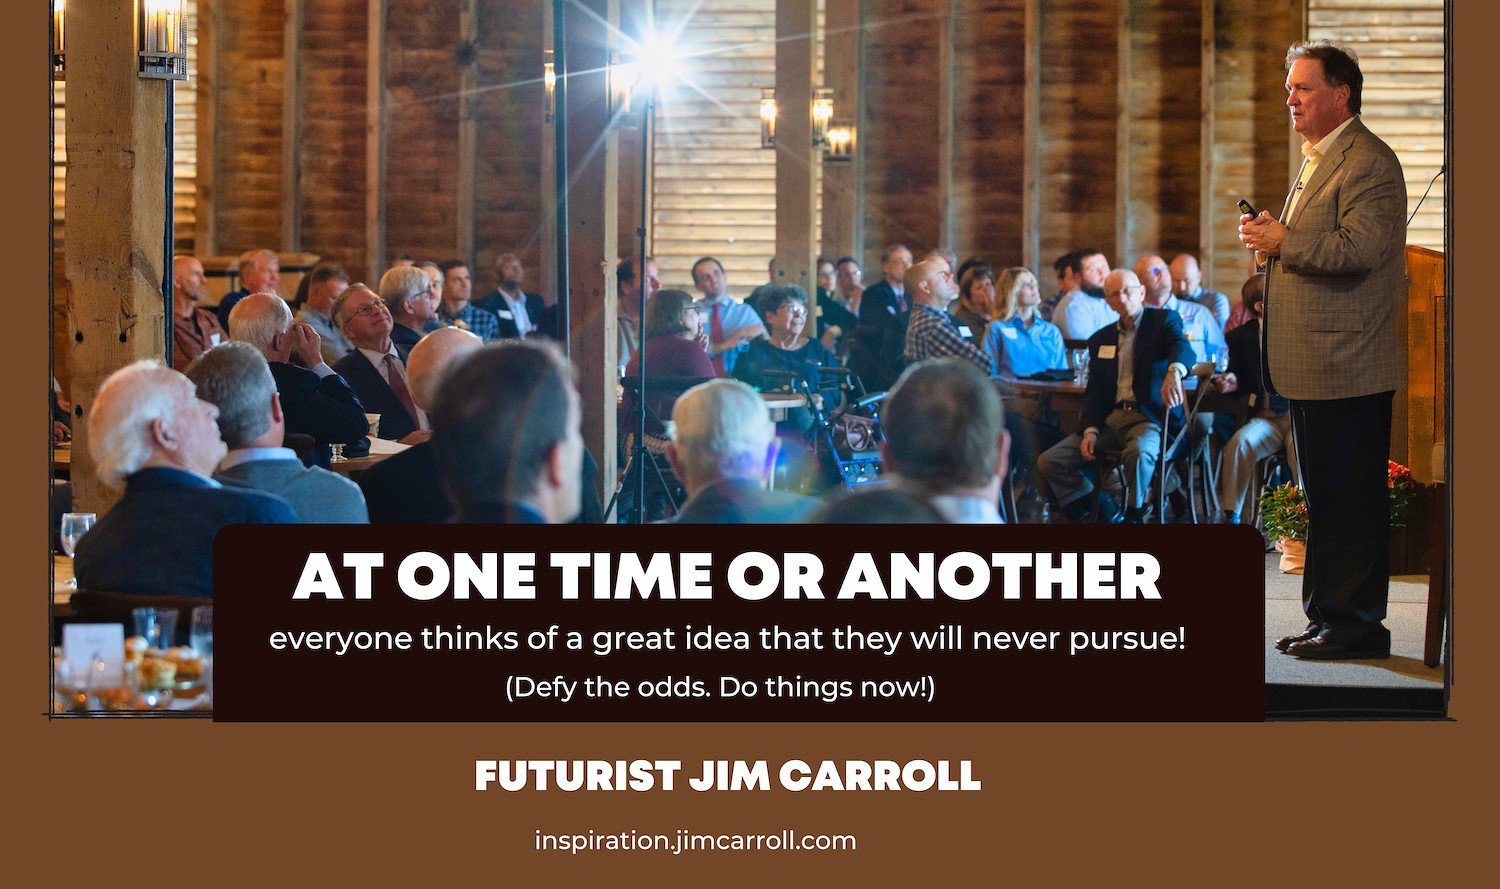 "At one time or another everyone thinks of a great idea that they will never pursue!" - Futurist Jim Carroll